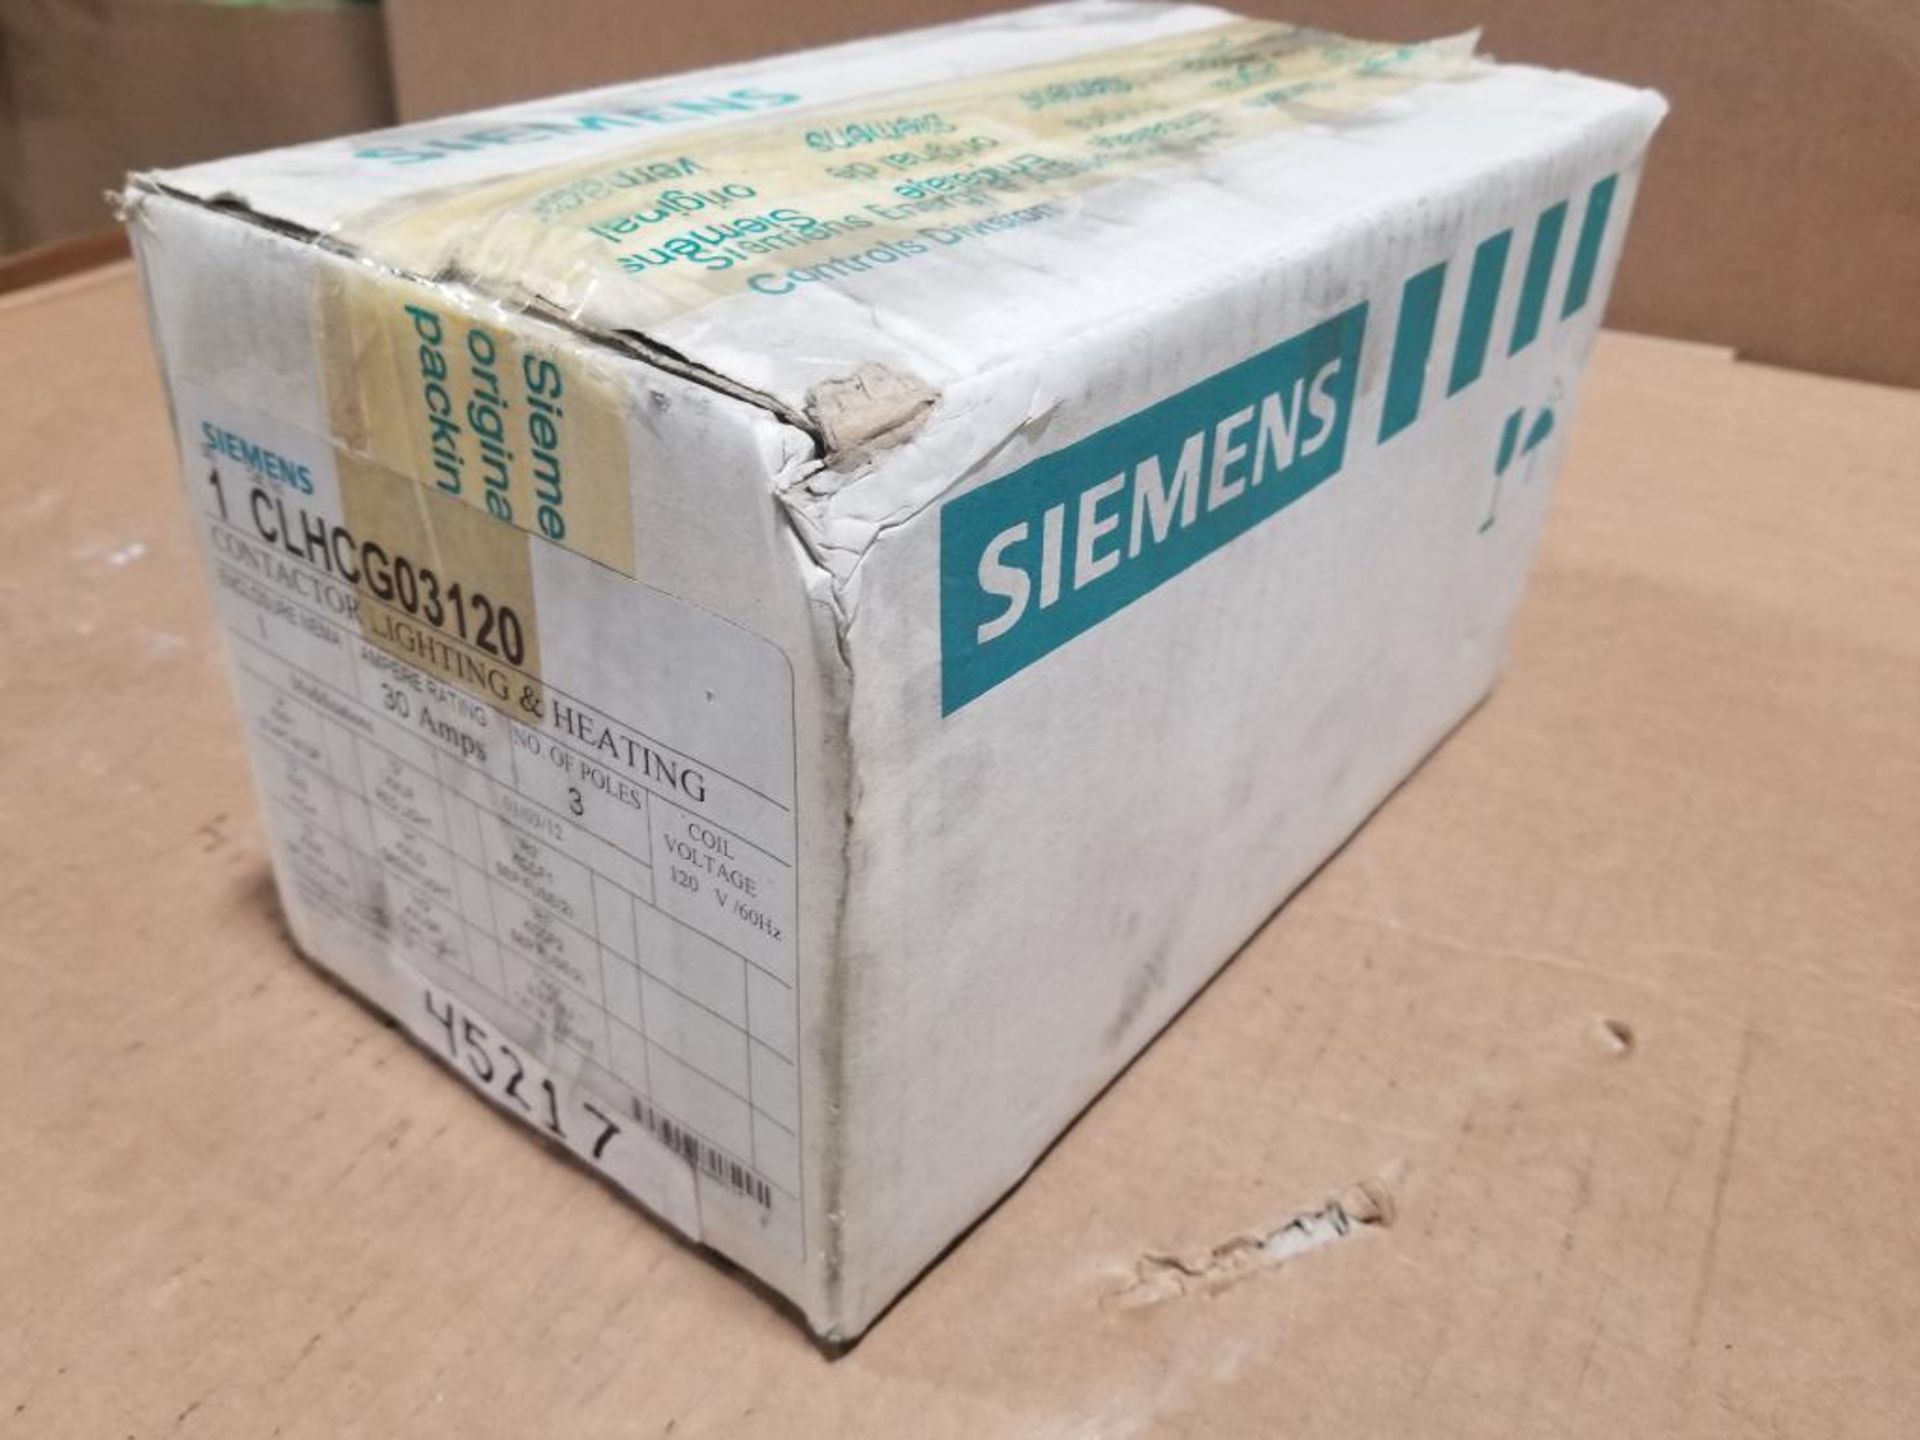 Siemens contactor lighting and heating. Part number CLHCG03120. - Image 3 of 4